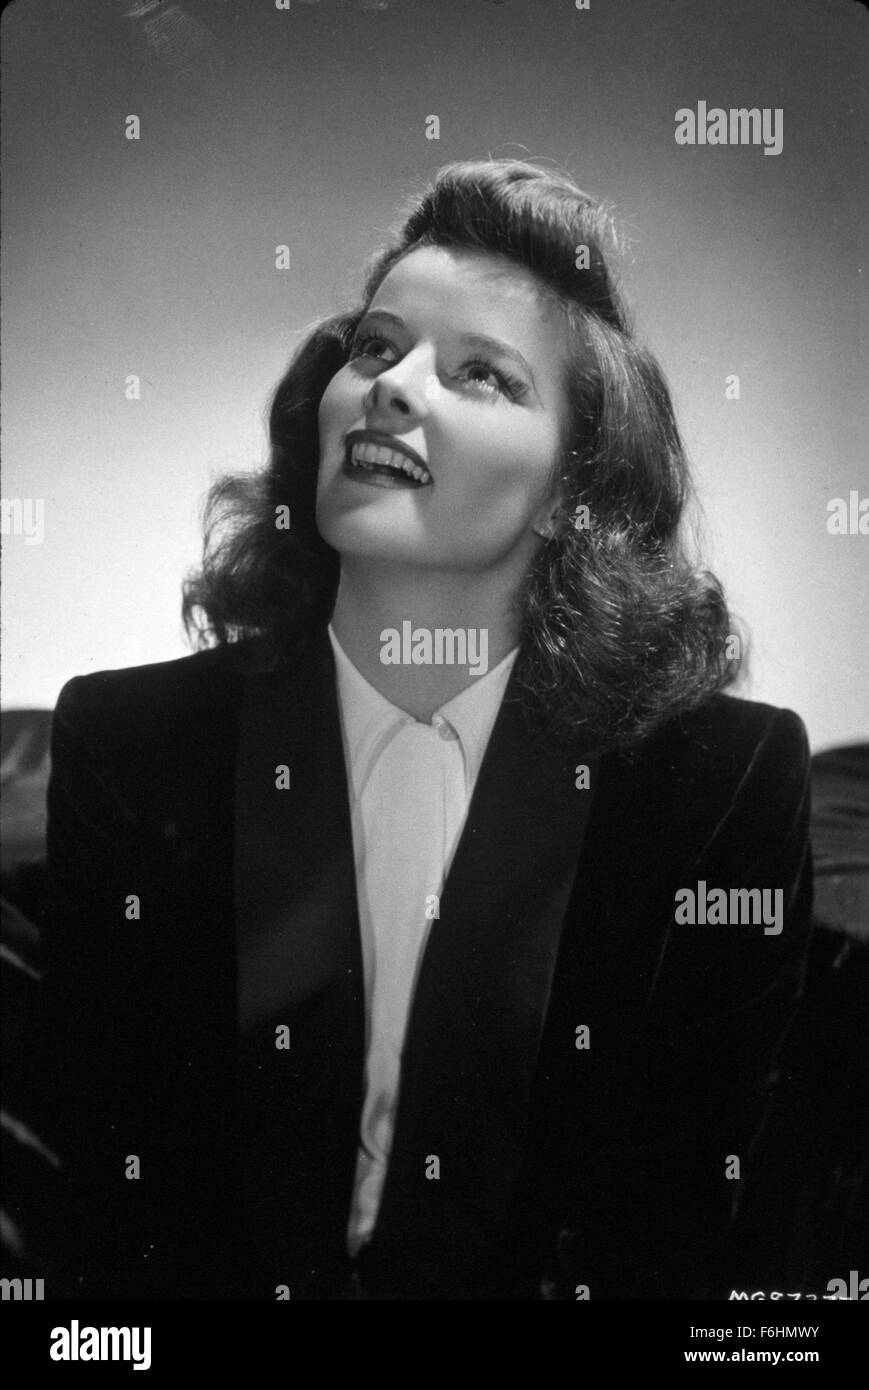 1942, Film Title: WOMAN OF THE YEAR, Director: GEORGE STEVENS, Studio: MGM, Pictured: KATHARINE HEPBURN, GEORGE STEVENS, LOOKING UP, MOUTH OPEN, SMILING, OPEN SMILE, BLAZER, SHIRT - WHITE, PORTRAIT. (Credit Image: SNAP) Stock Photo